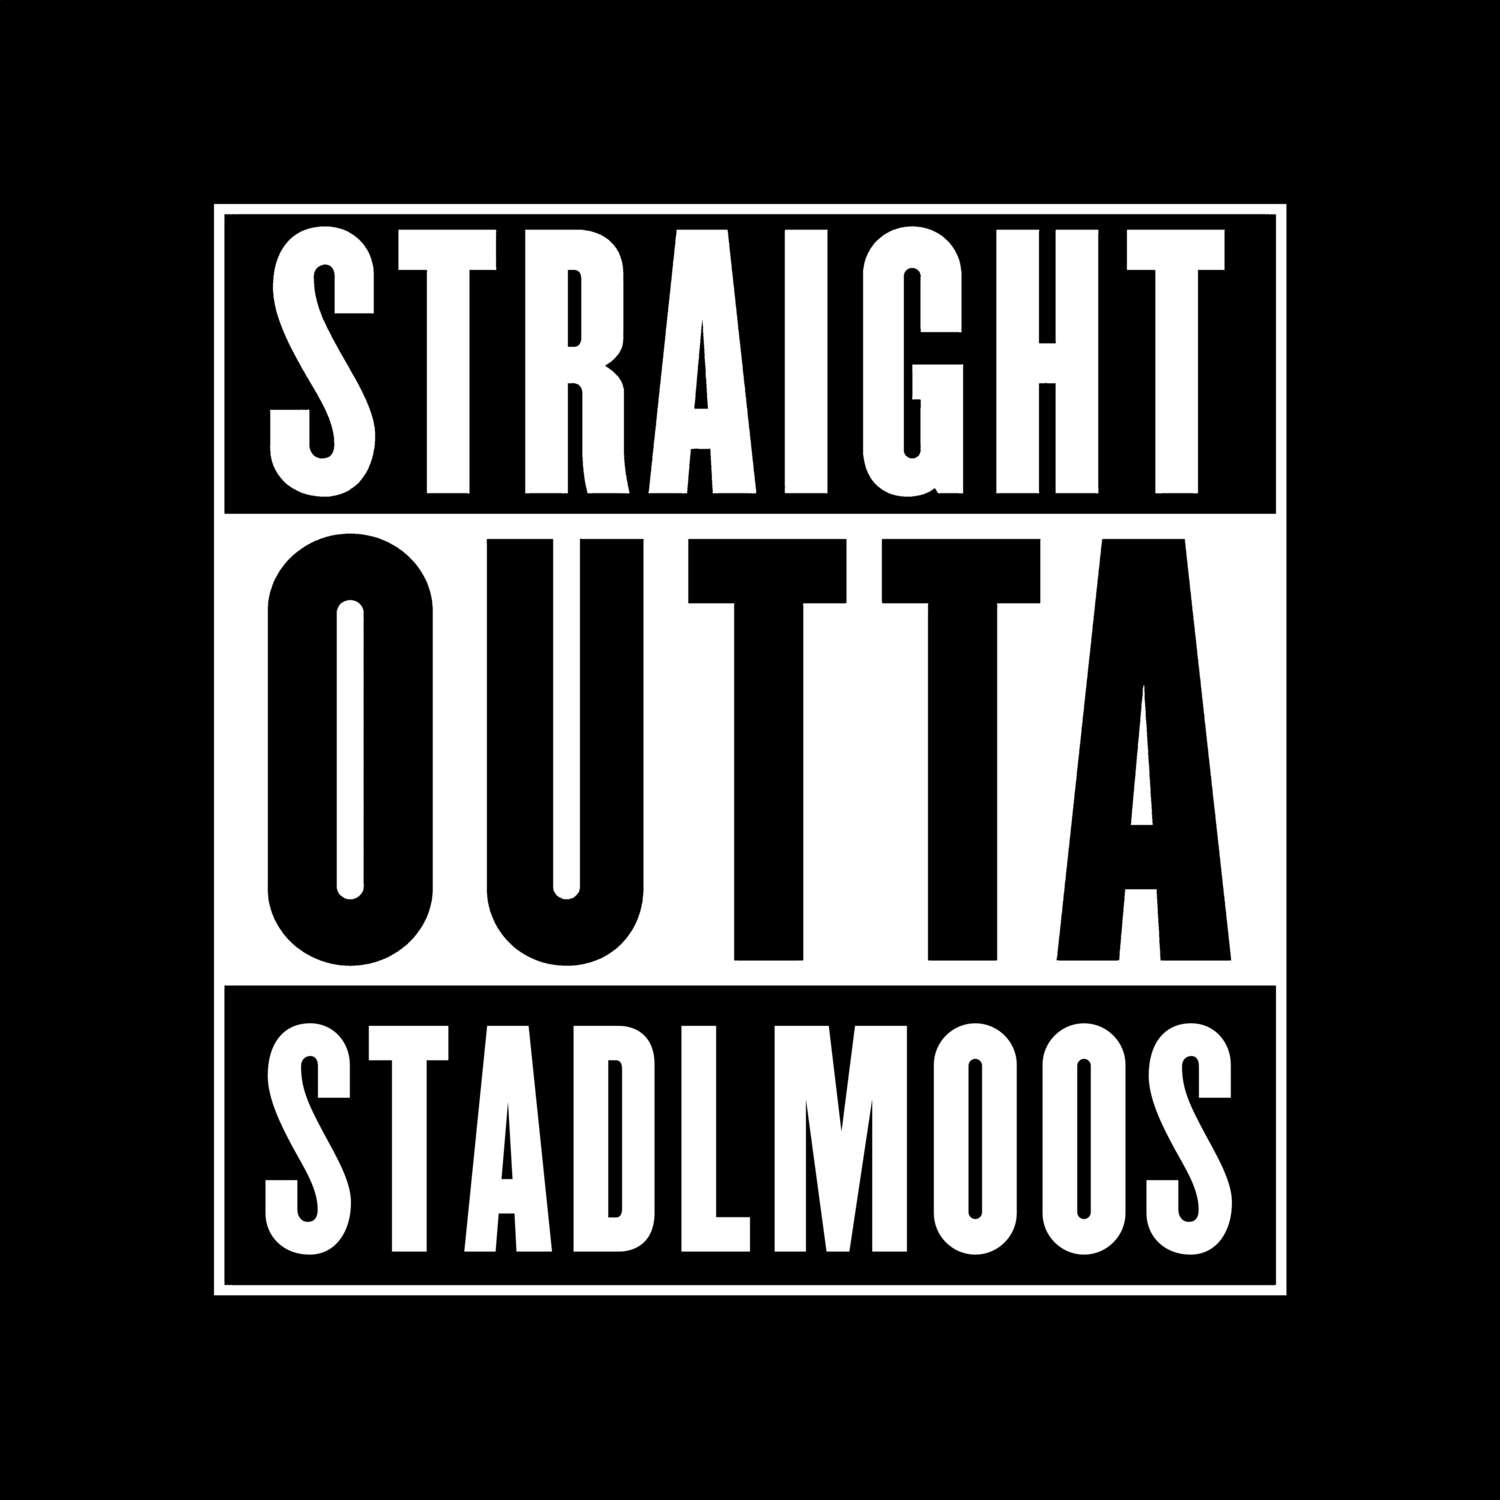 Stadlmoos T-Shirt »Straight Outta«